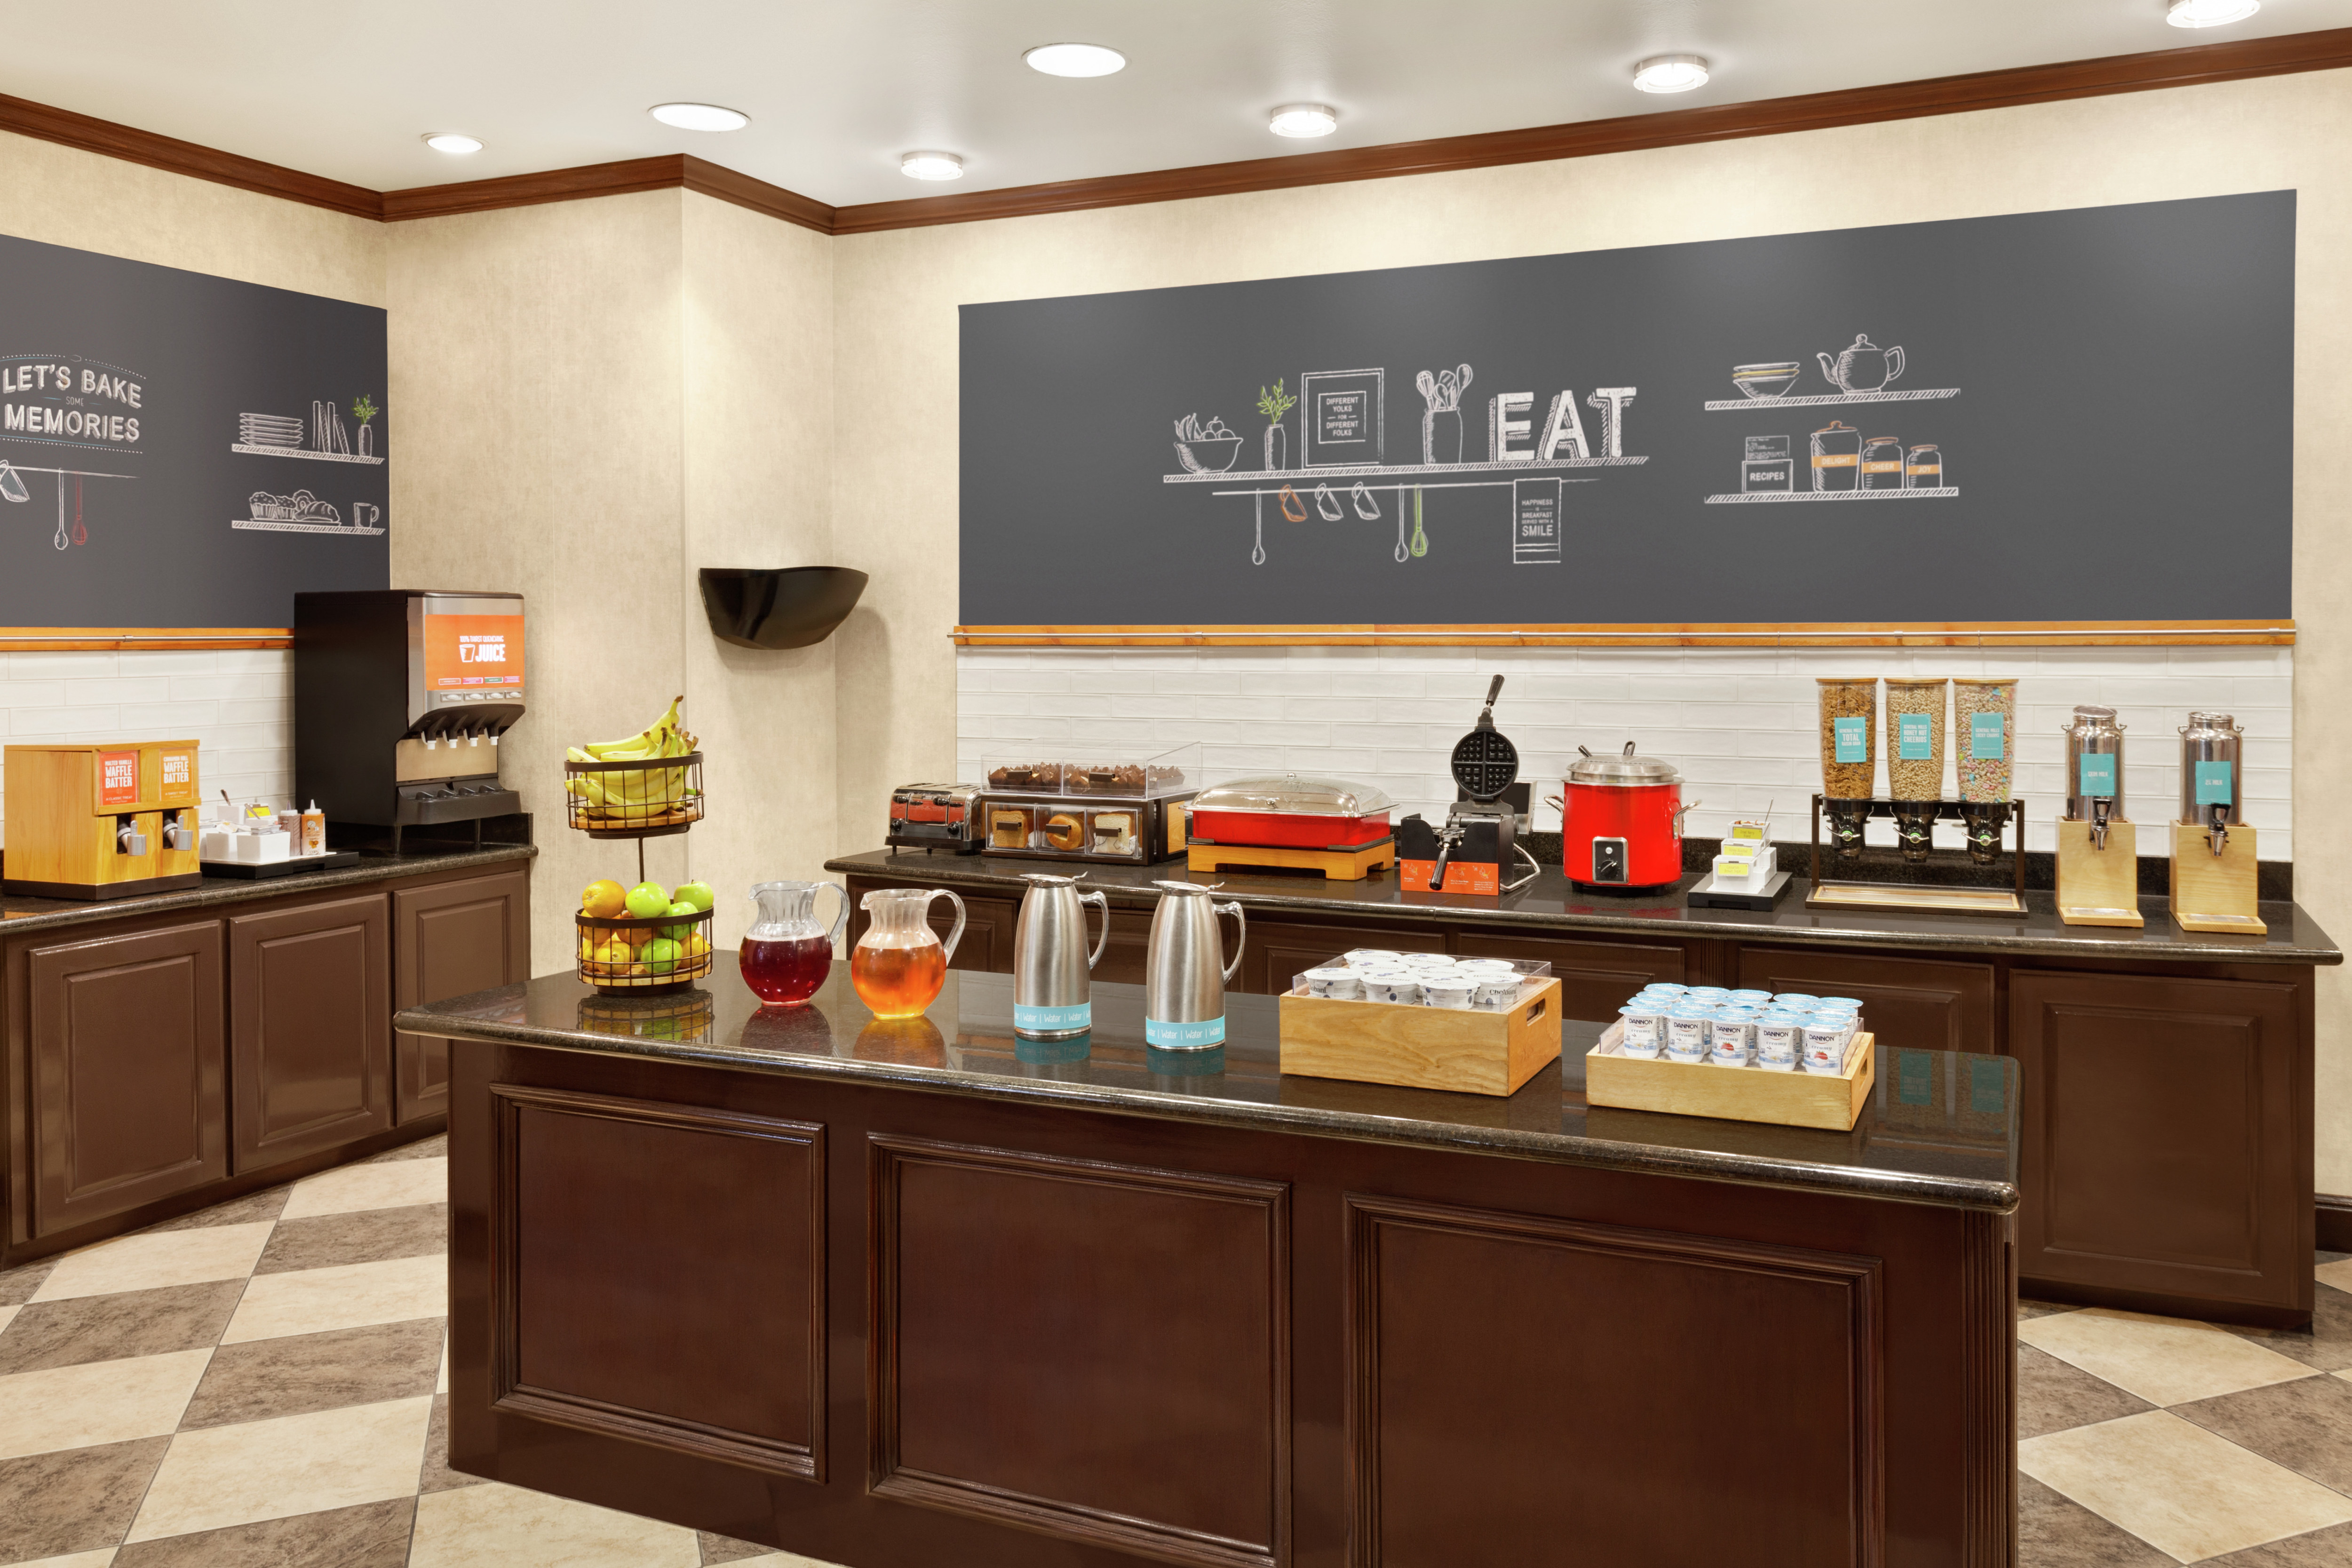 Complimentary daily breakfast buffet overflowing with delicious food and beverages.